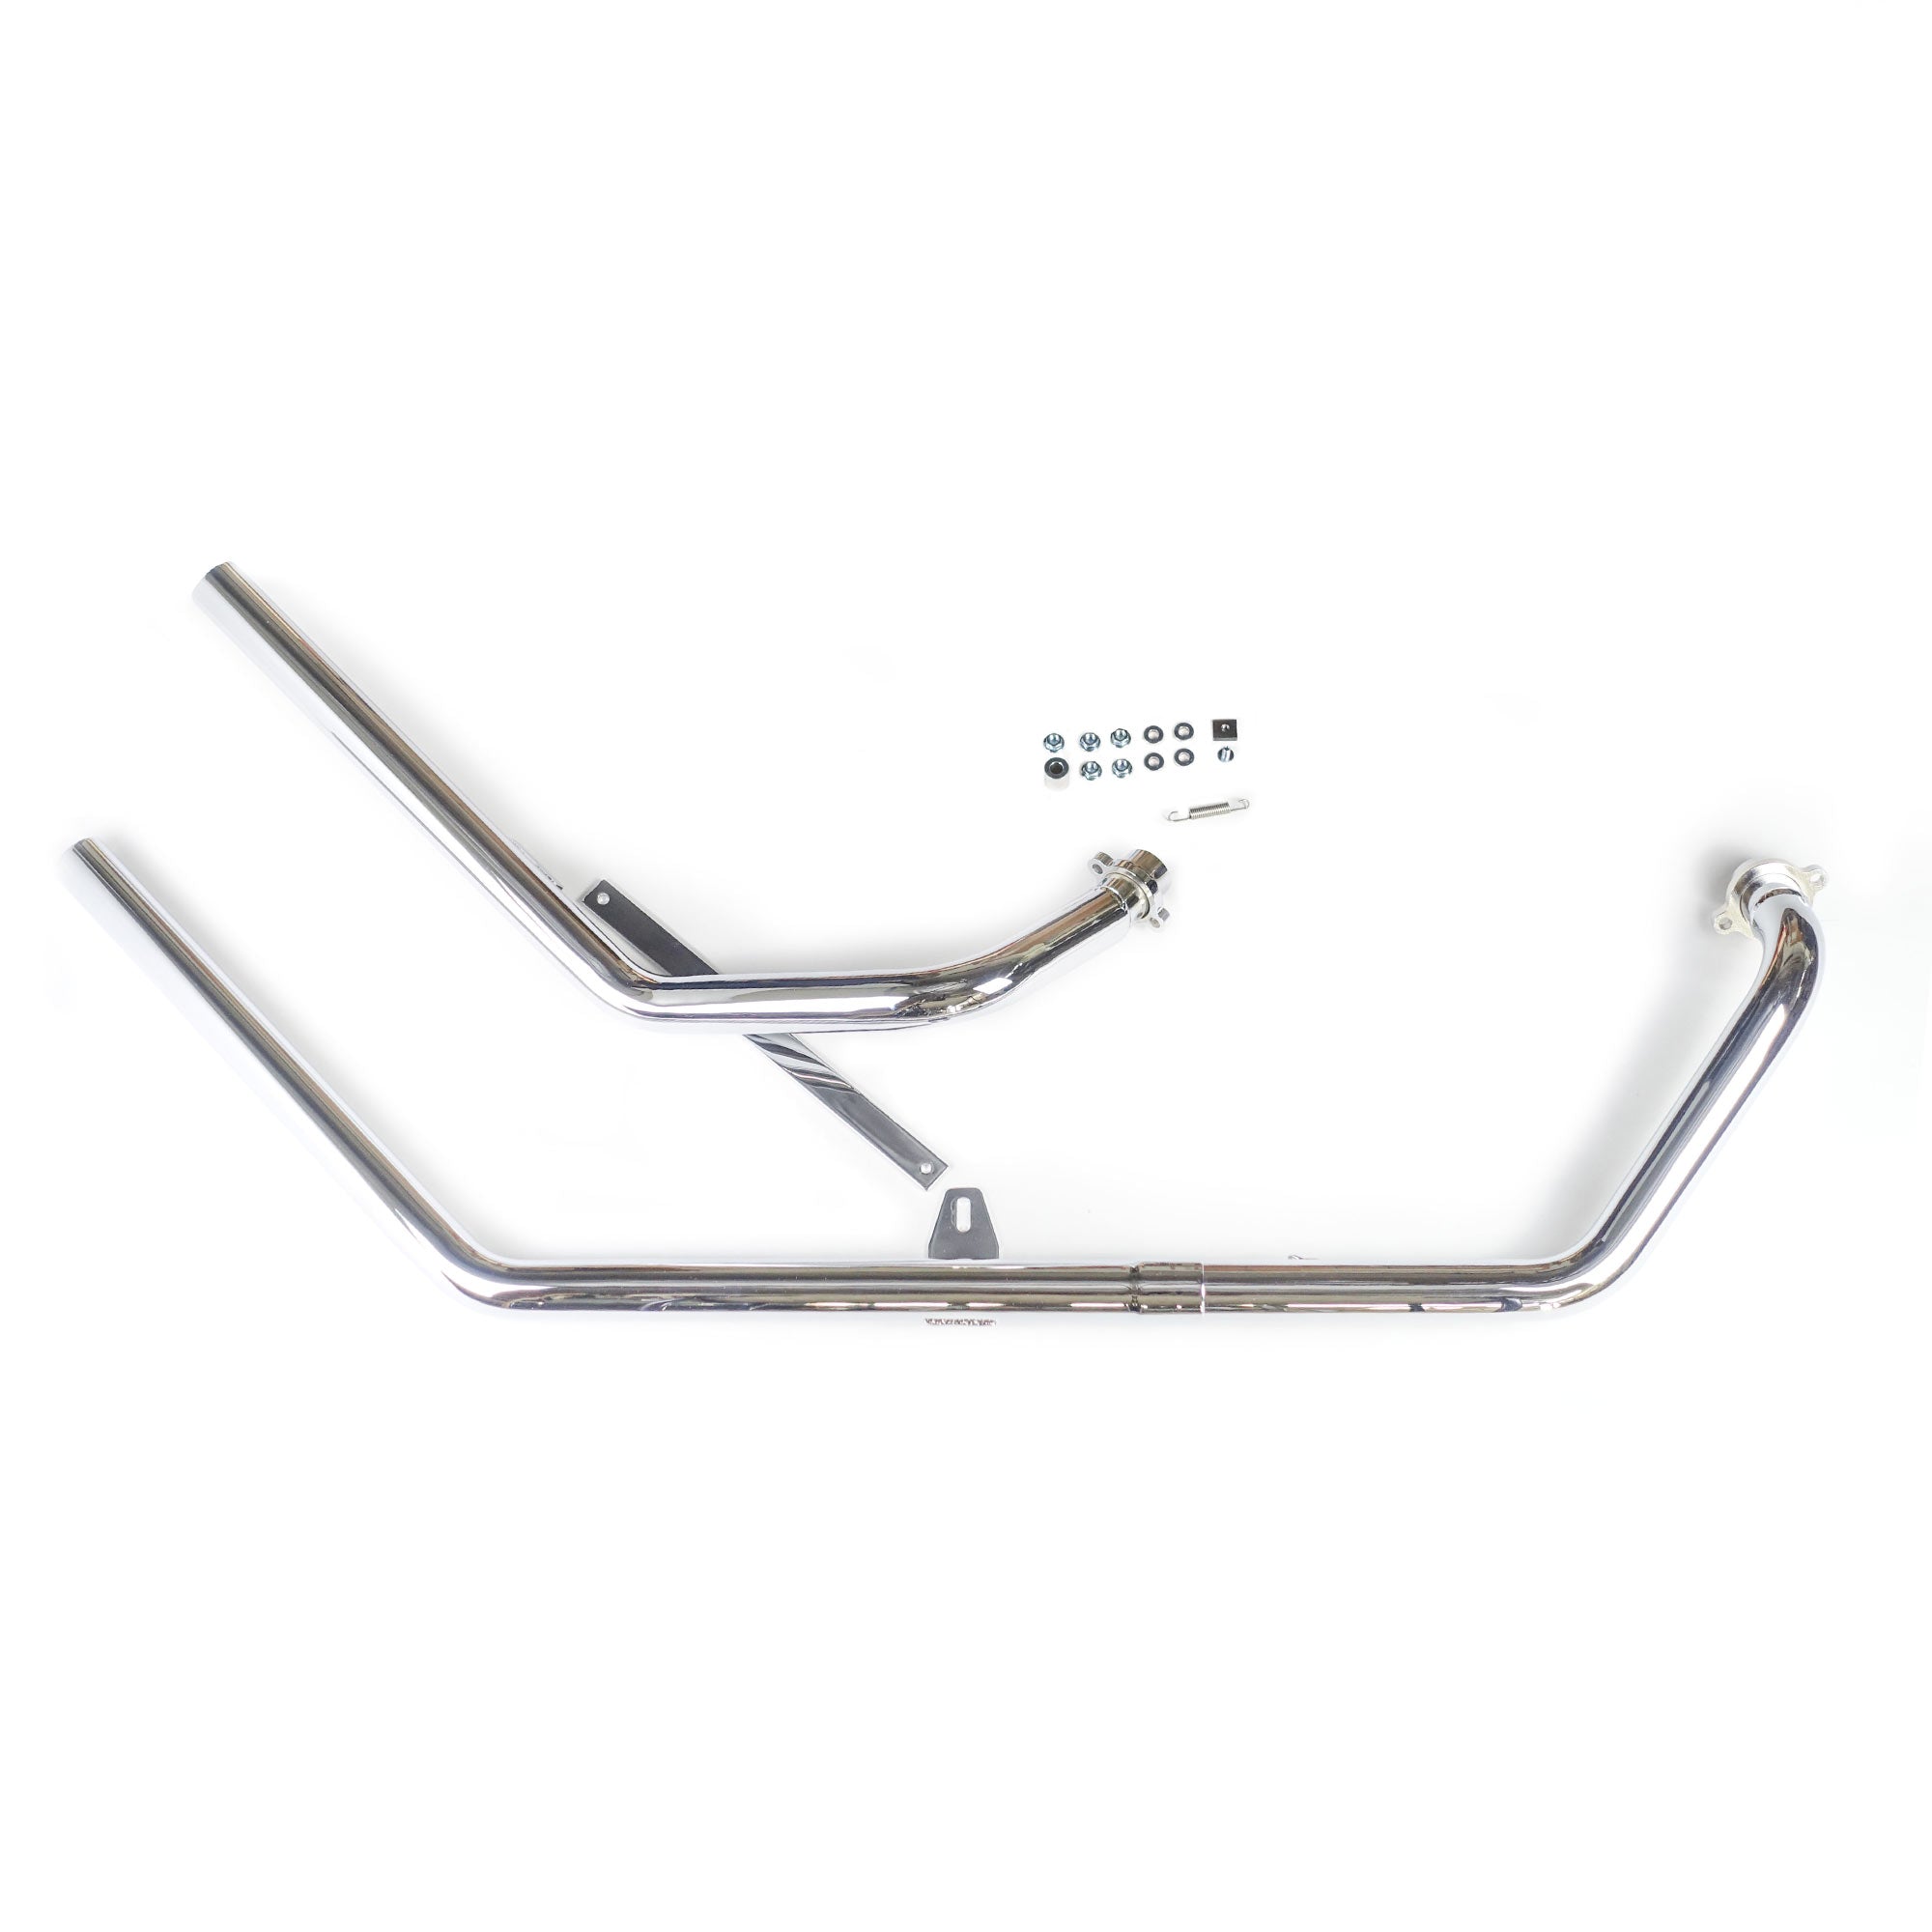 Wide Profile Upsweep Exhaust - Chrome - Fits Honda Shadow VT600